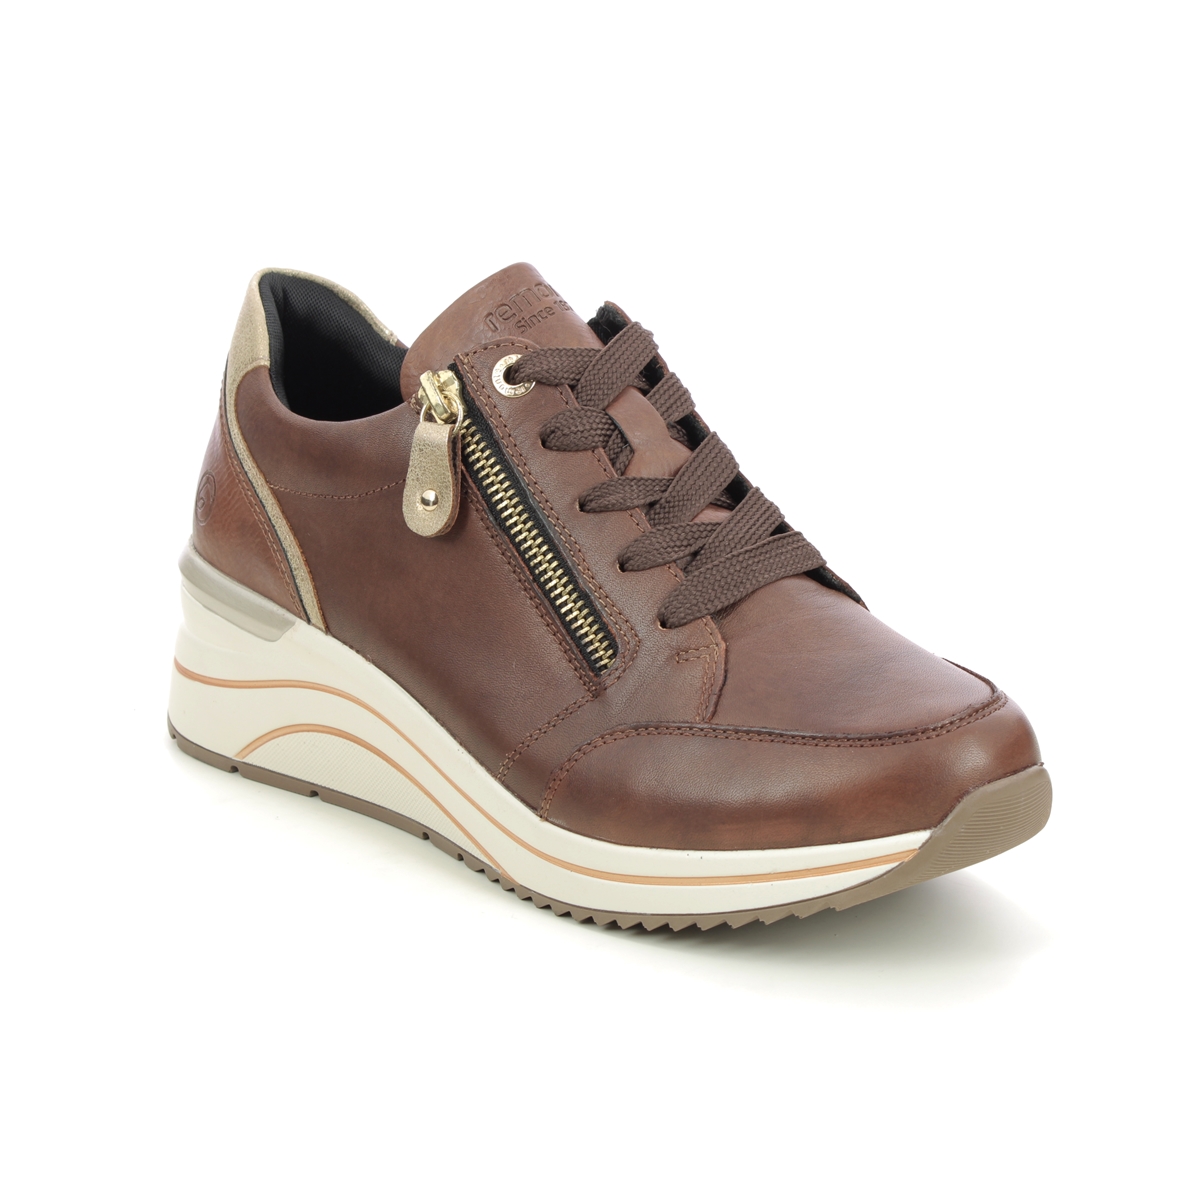 Remonte Ranzip Wedge Tan Leather Womens Trainers D0T03-22 In Size 36 In Plain Tan Leather